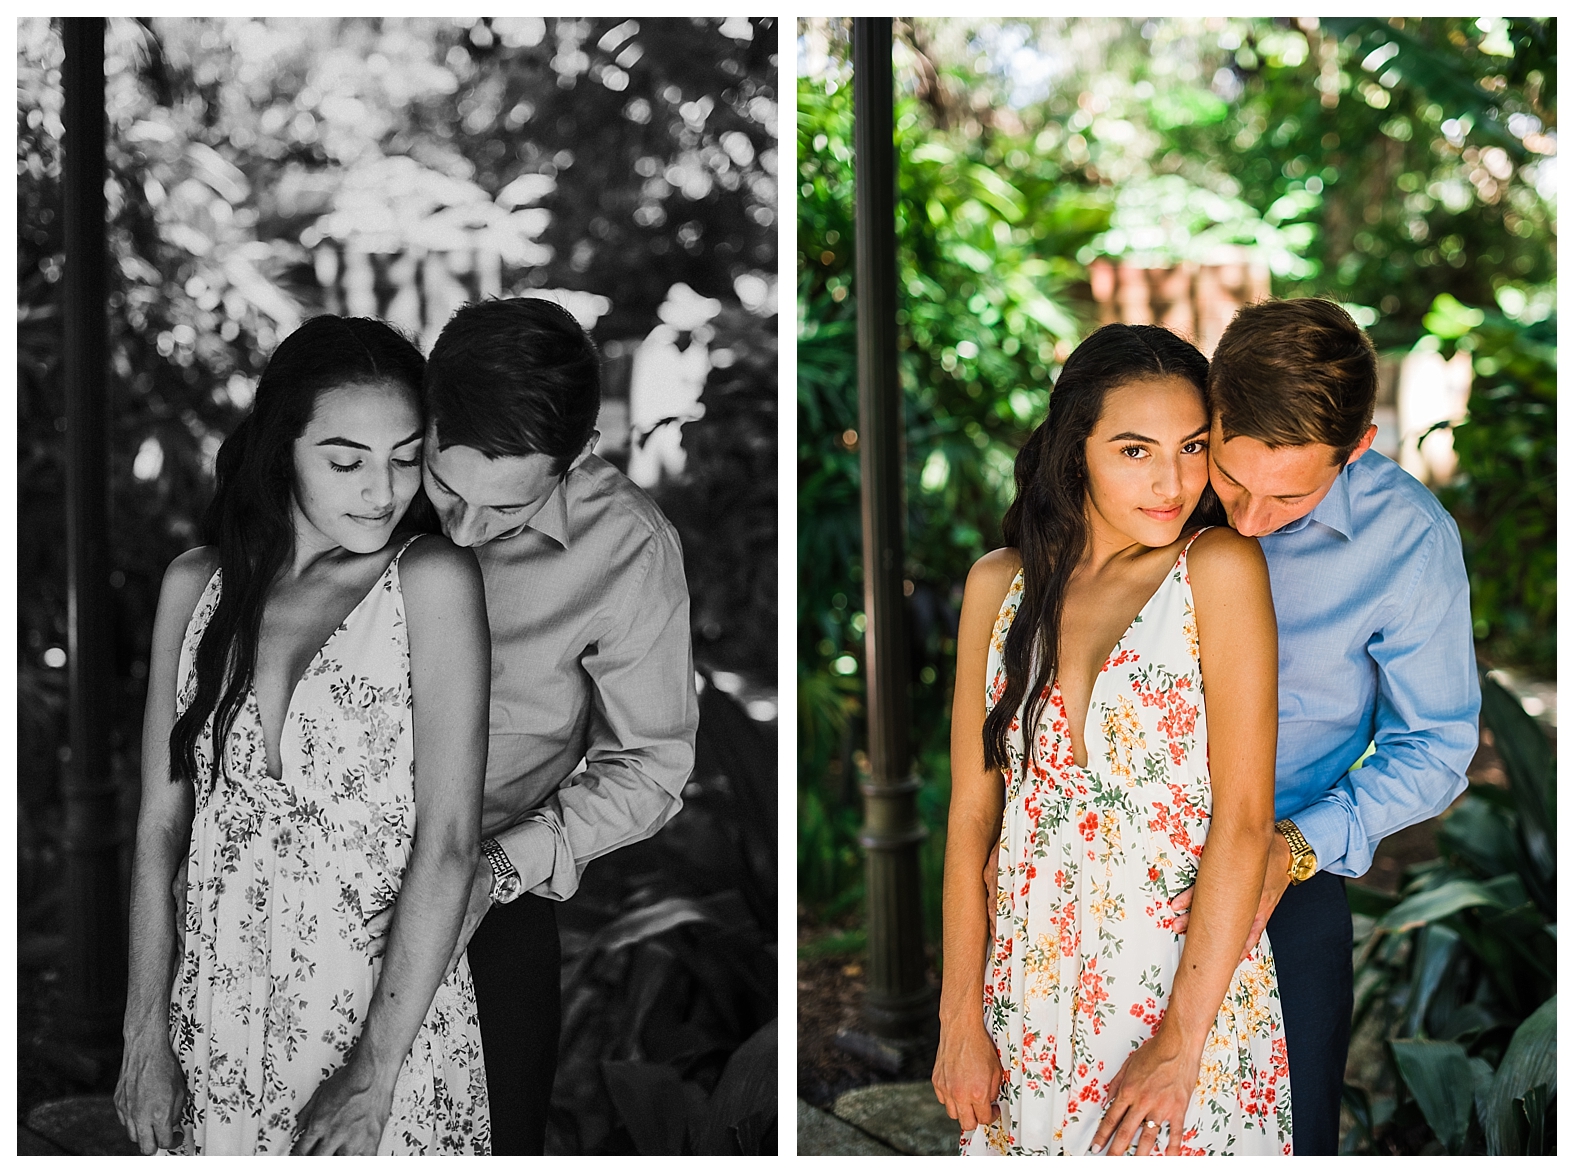 must have engagement photo, poses for couples, couple poses, wedding garden, garden wedding, garden engagement session, garden wedding photographer, sunken gardens, sunken gardens wedding, sunken gardens engagements